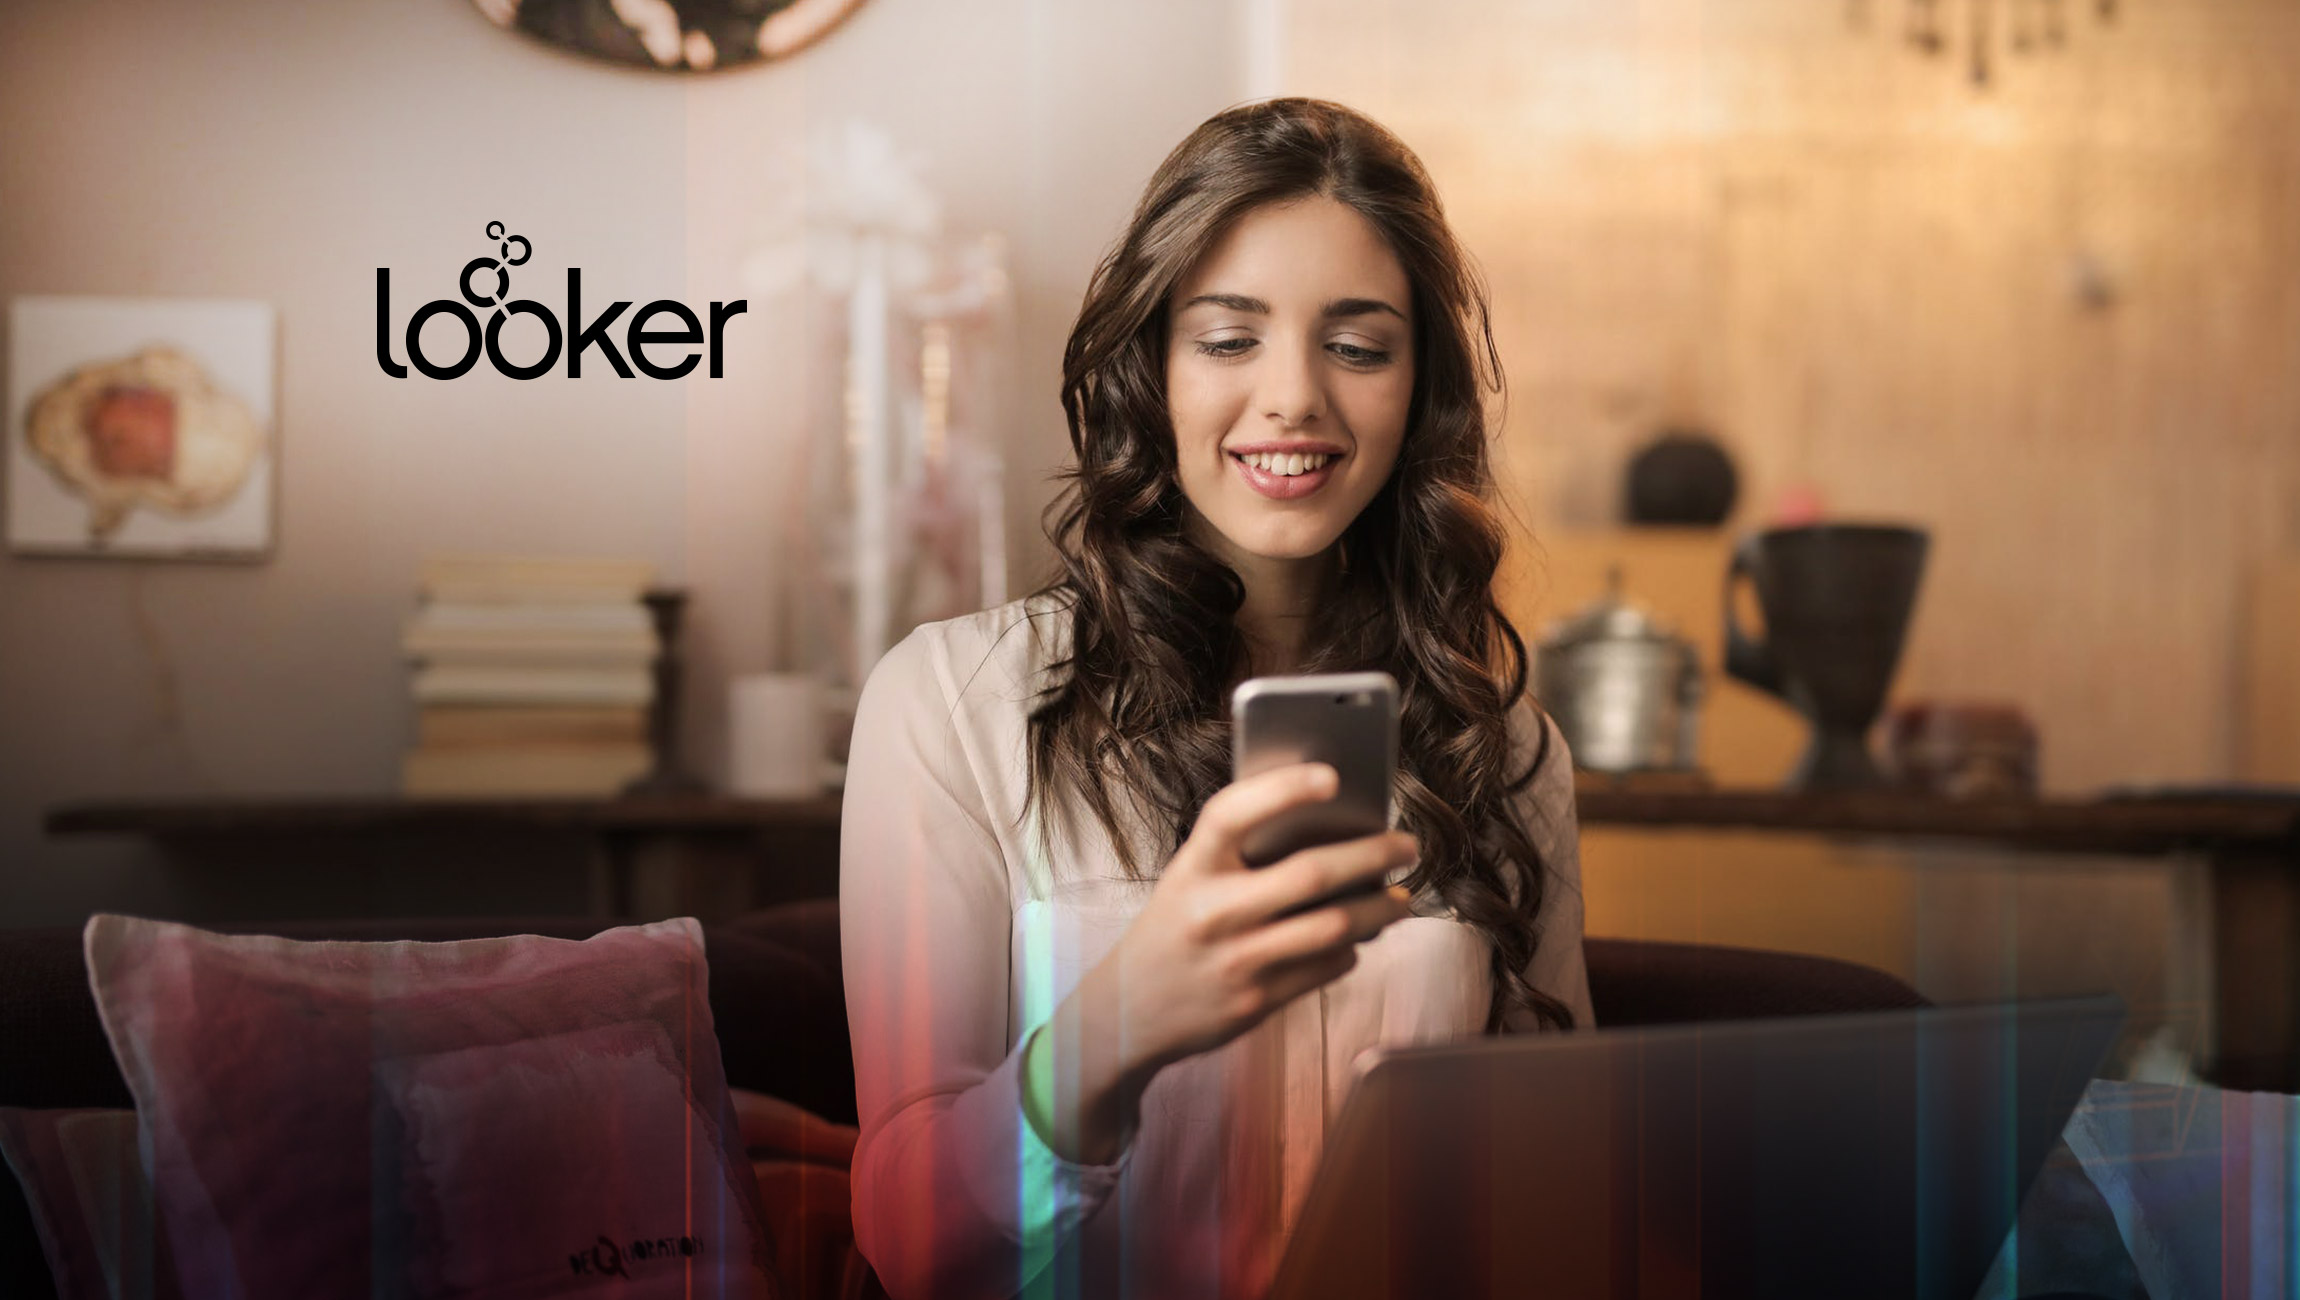 Looker Closes Series E Financing Round of $103 Million